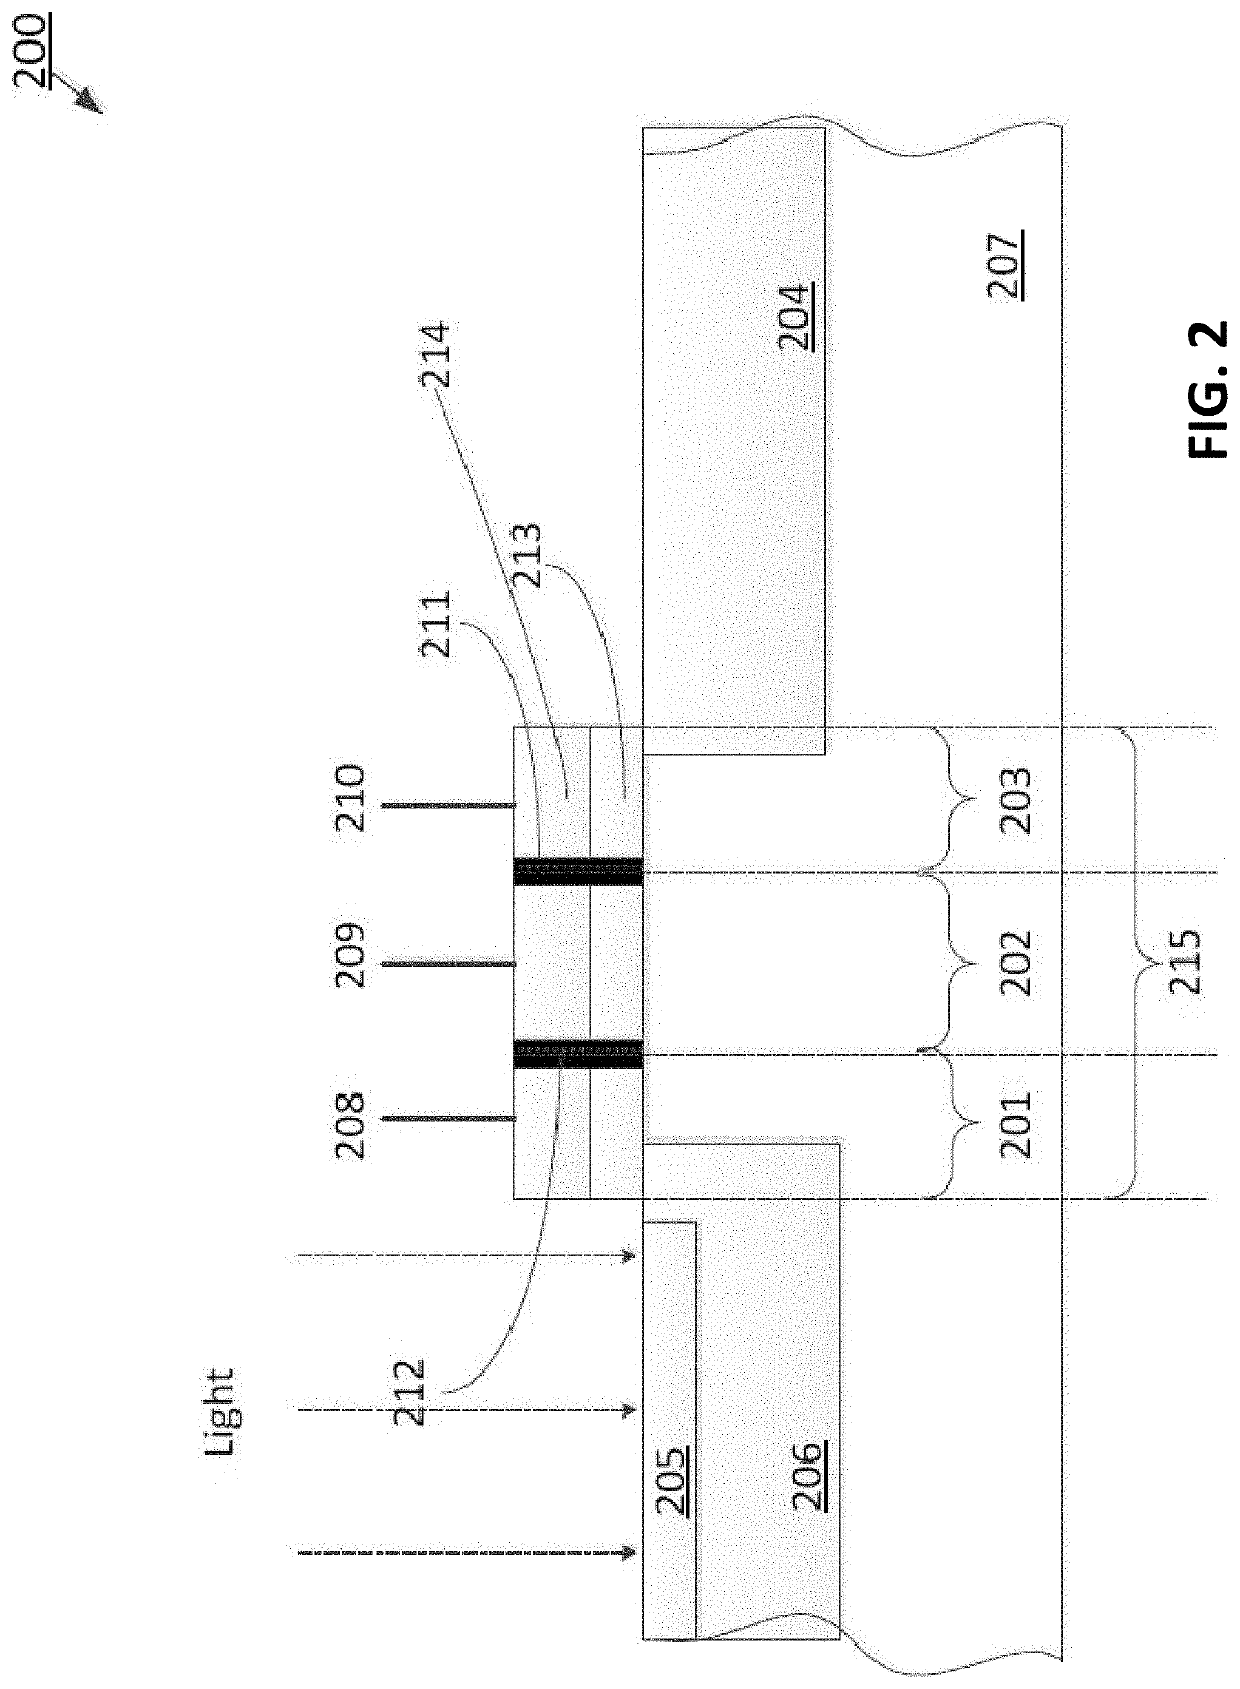 CMOS image sensor with multiple stage transfer gate